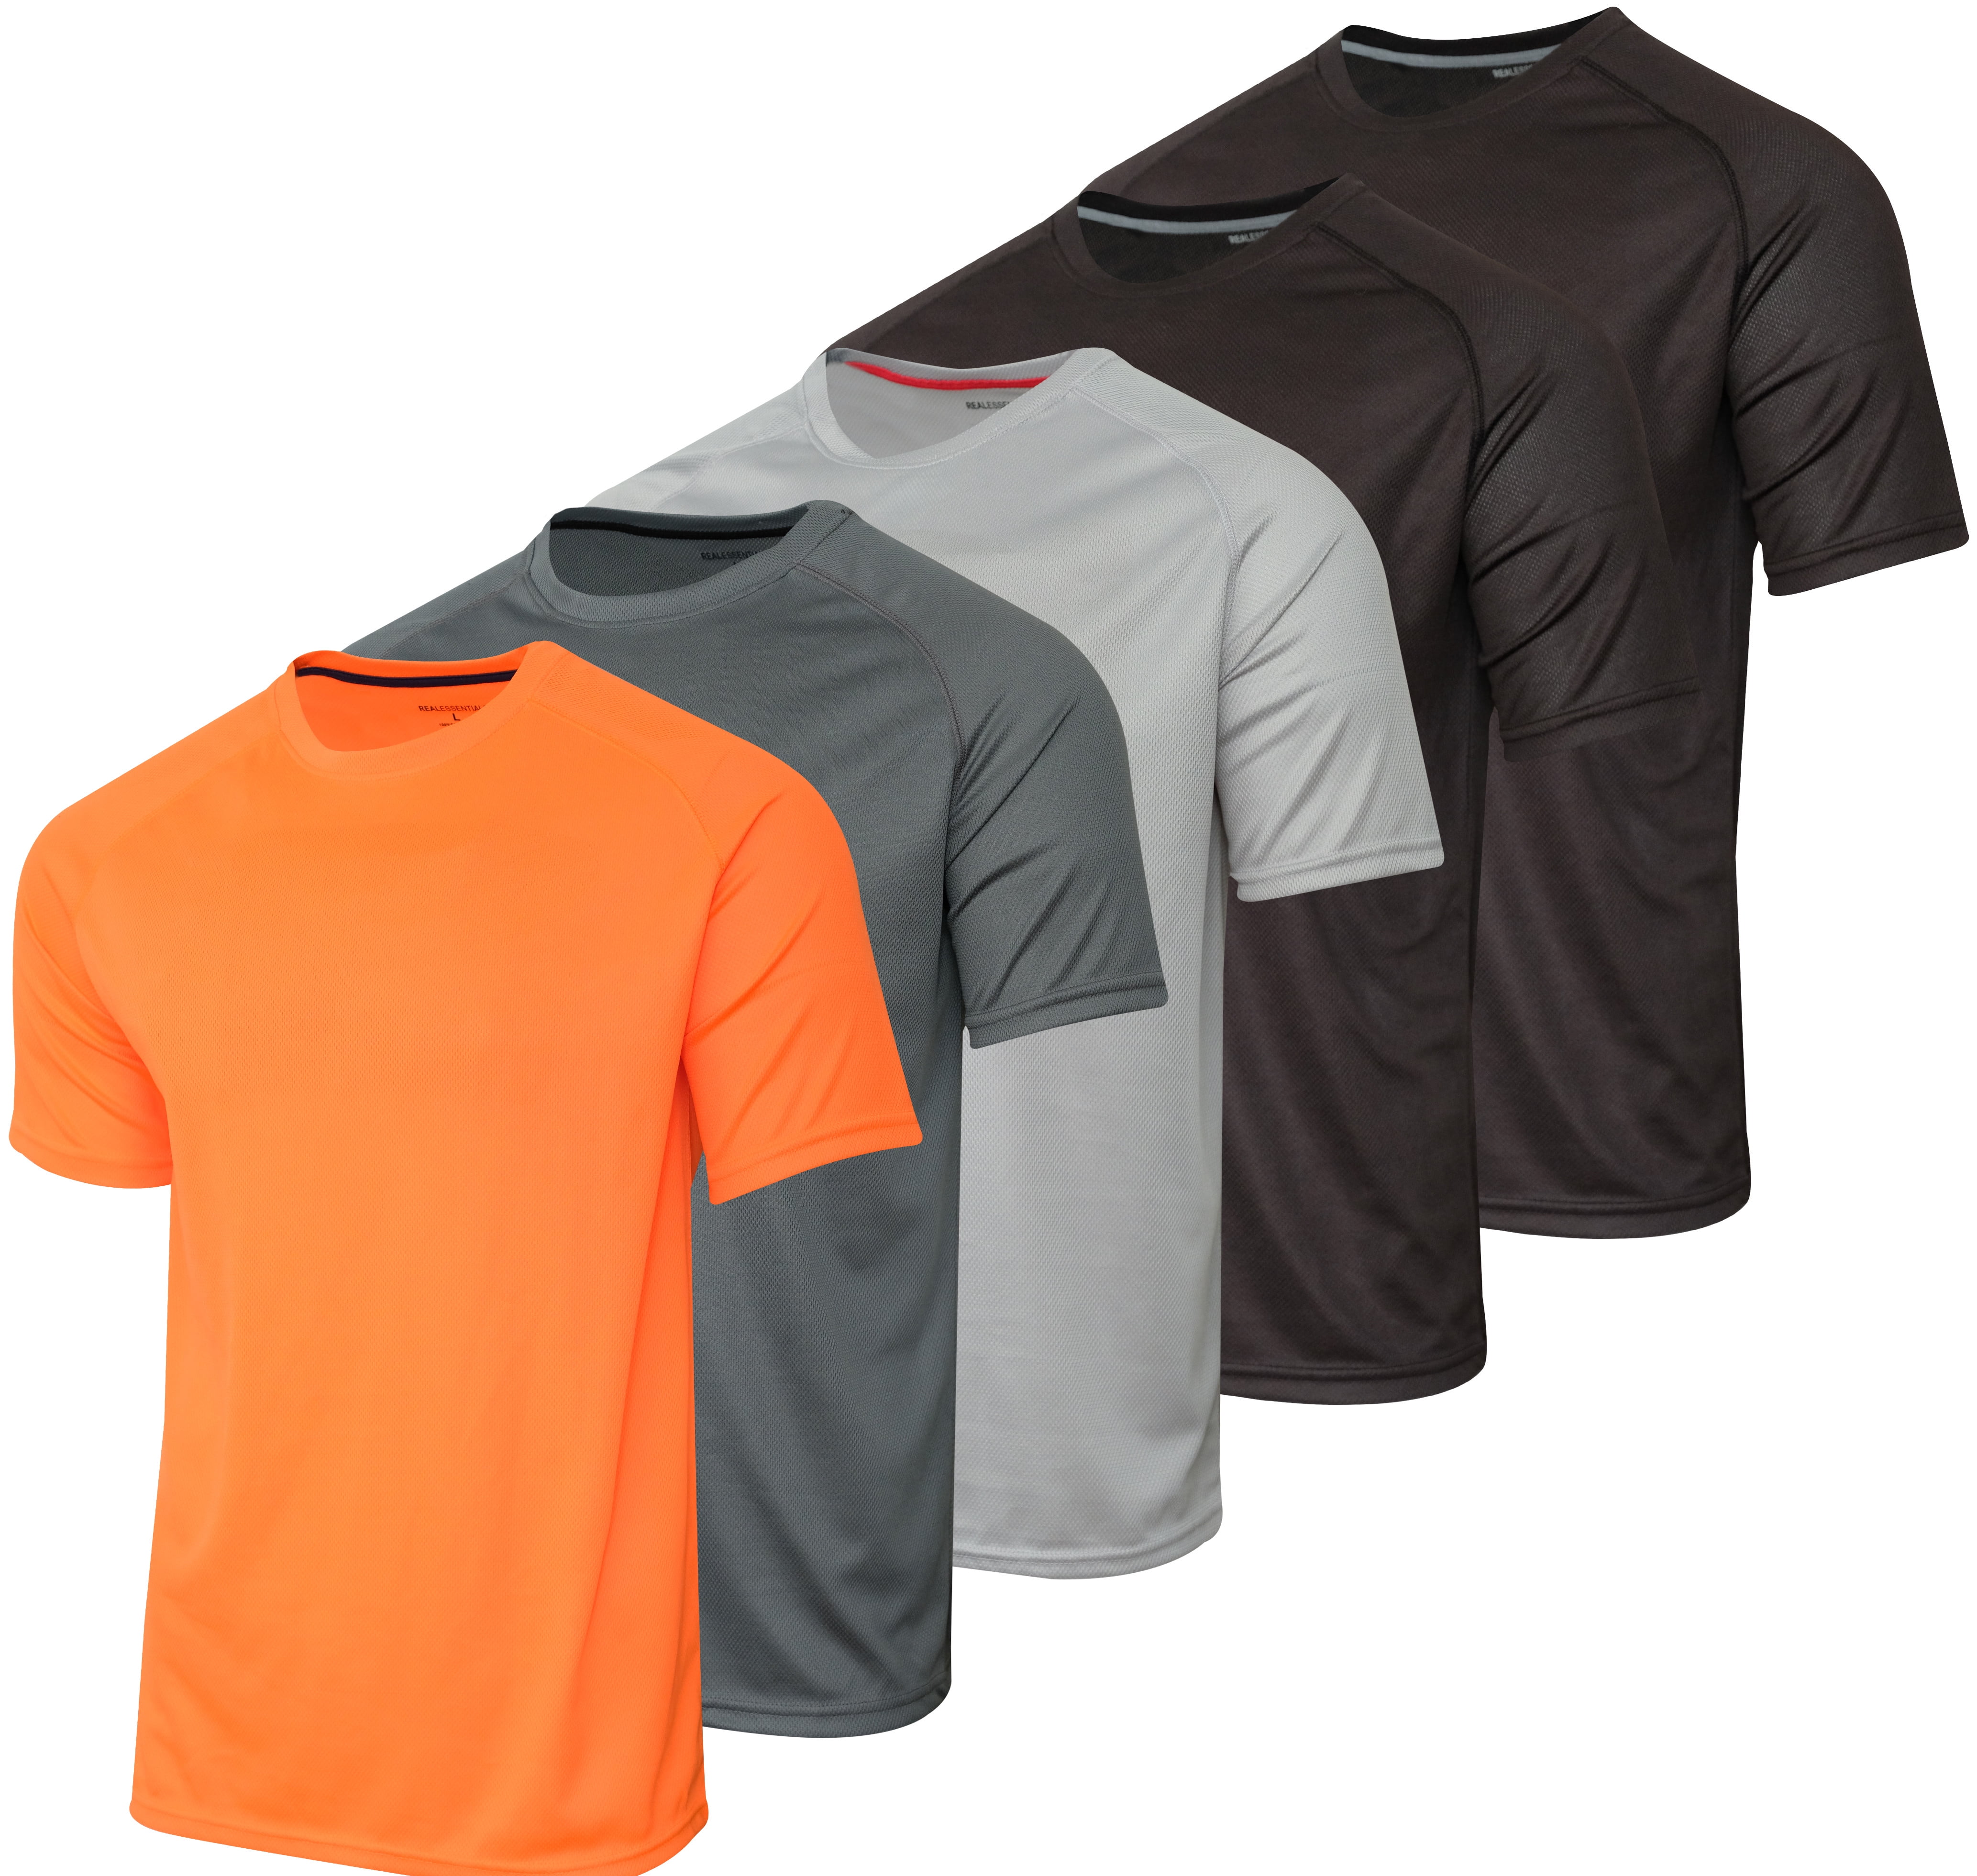  5 Pack Boys Athletic Shirts, Youth Activewear Dry Fit